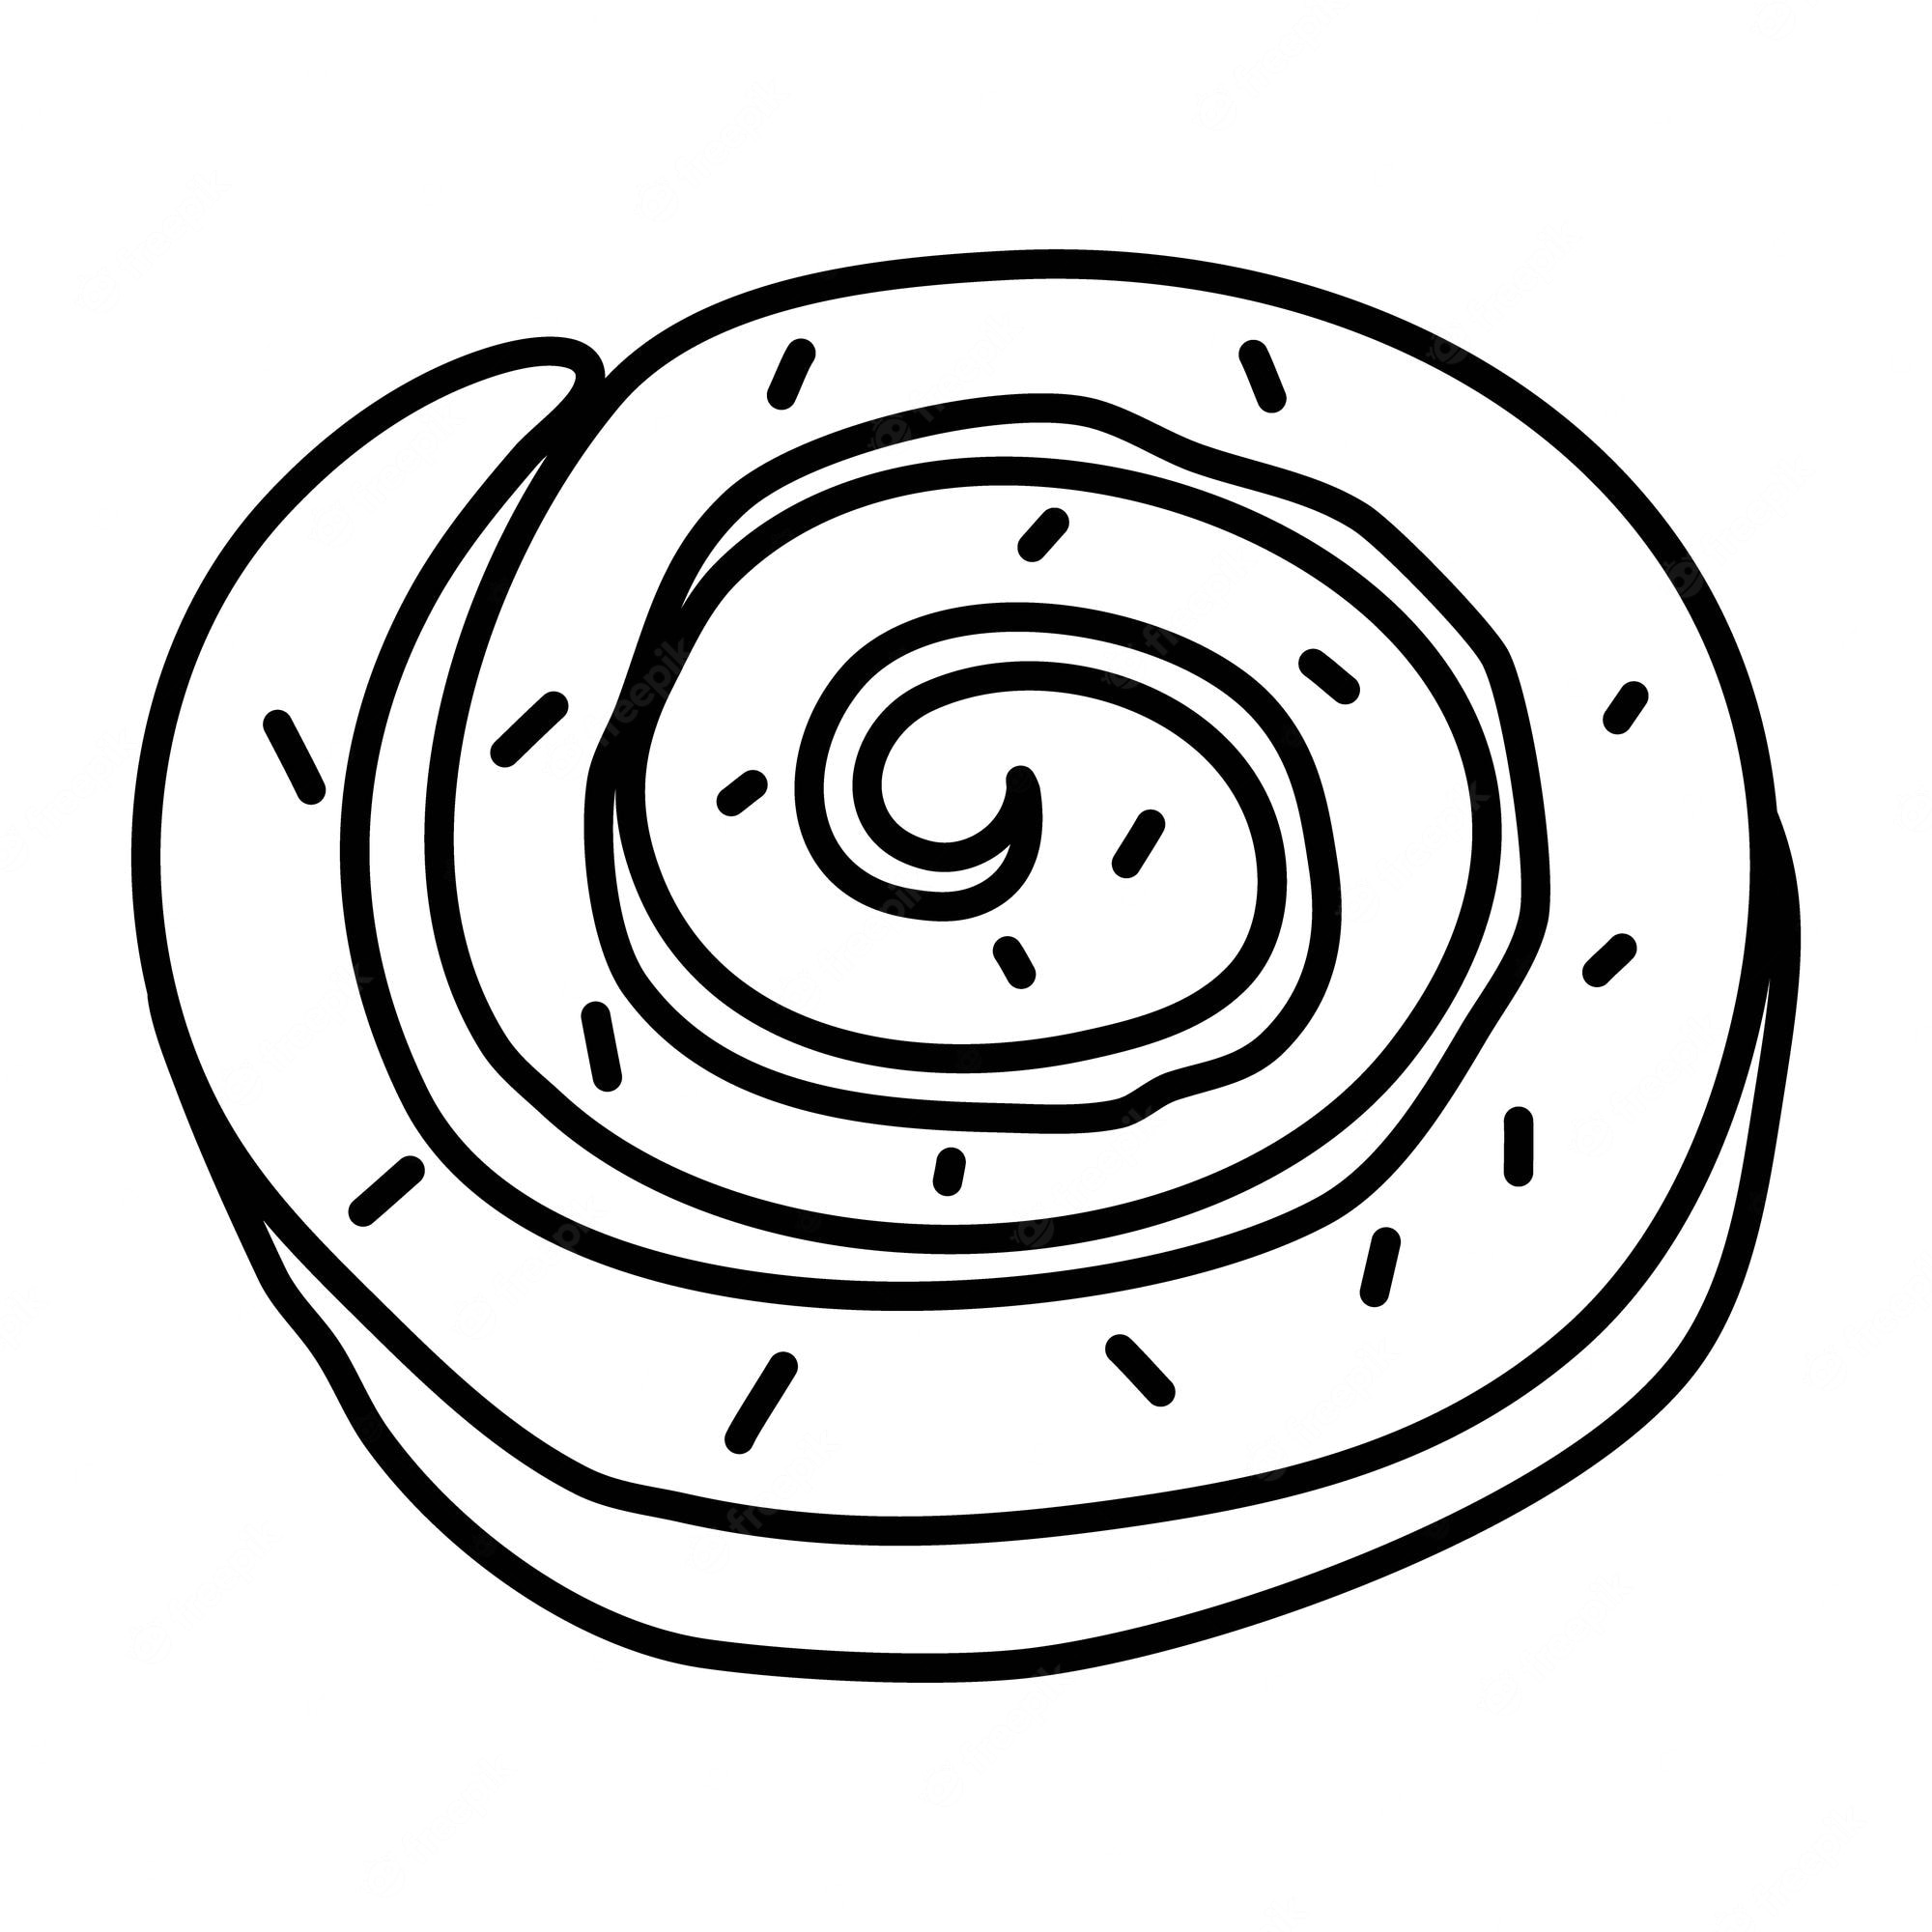 Cinnamon Roll Icon Images | Free Vectors, Stock Photos & PSD